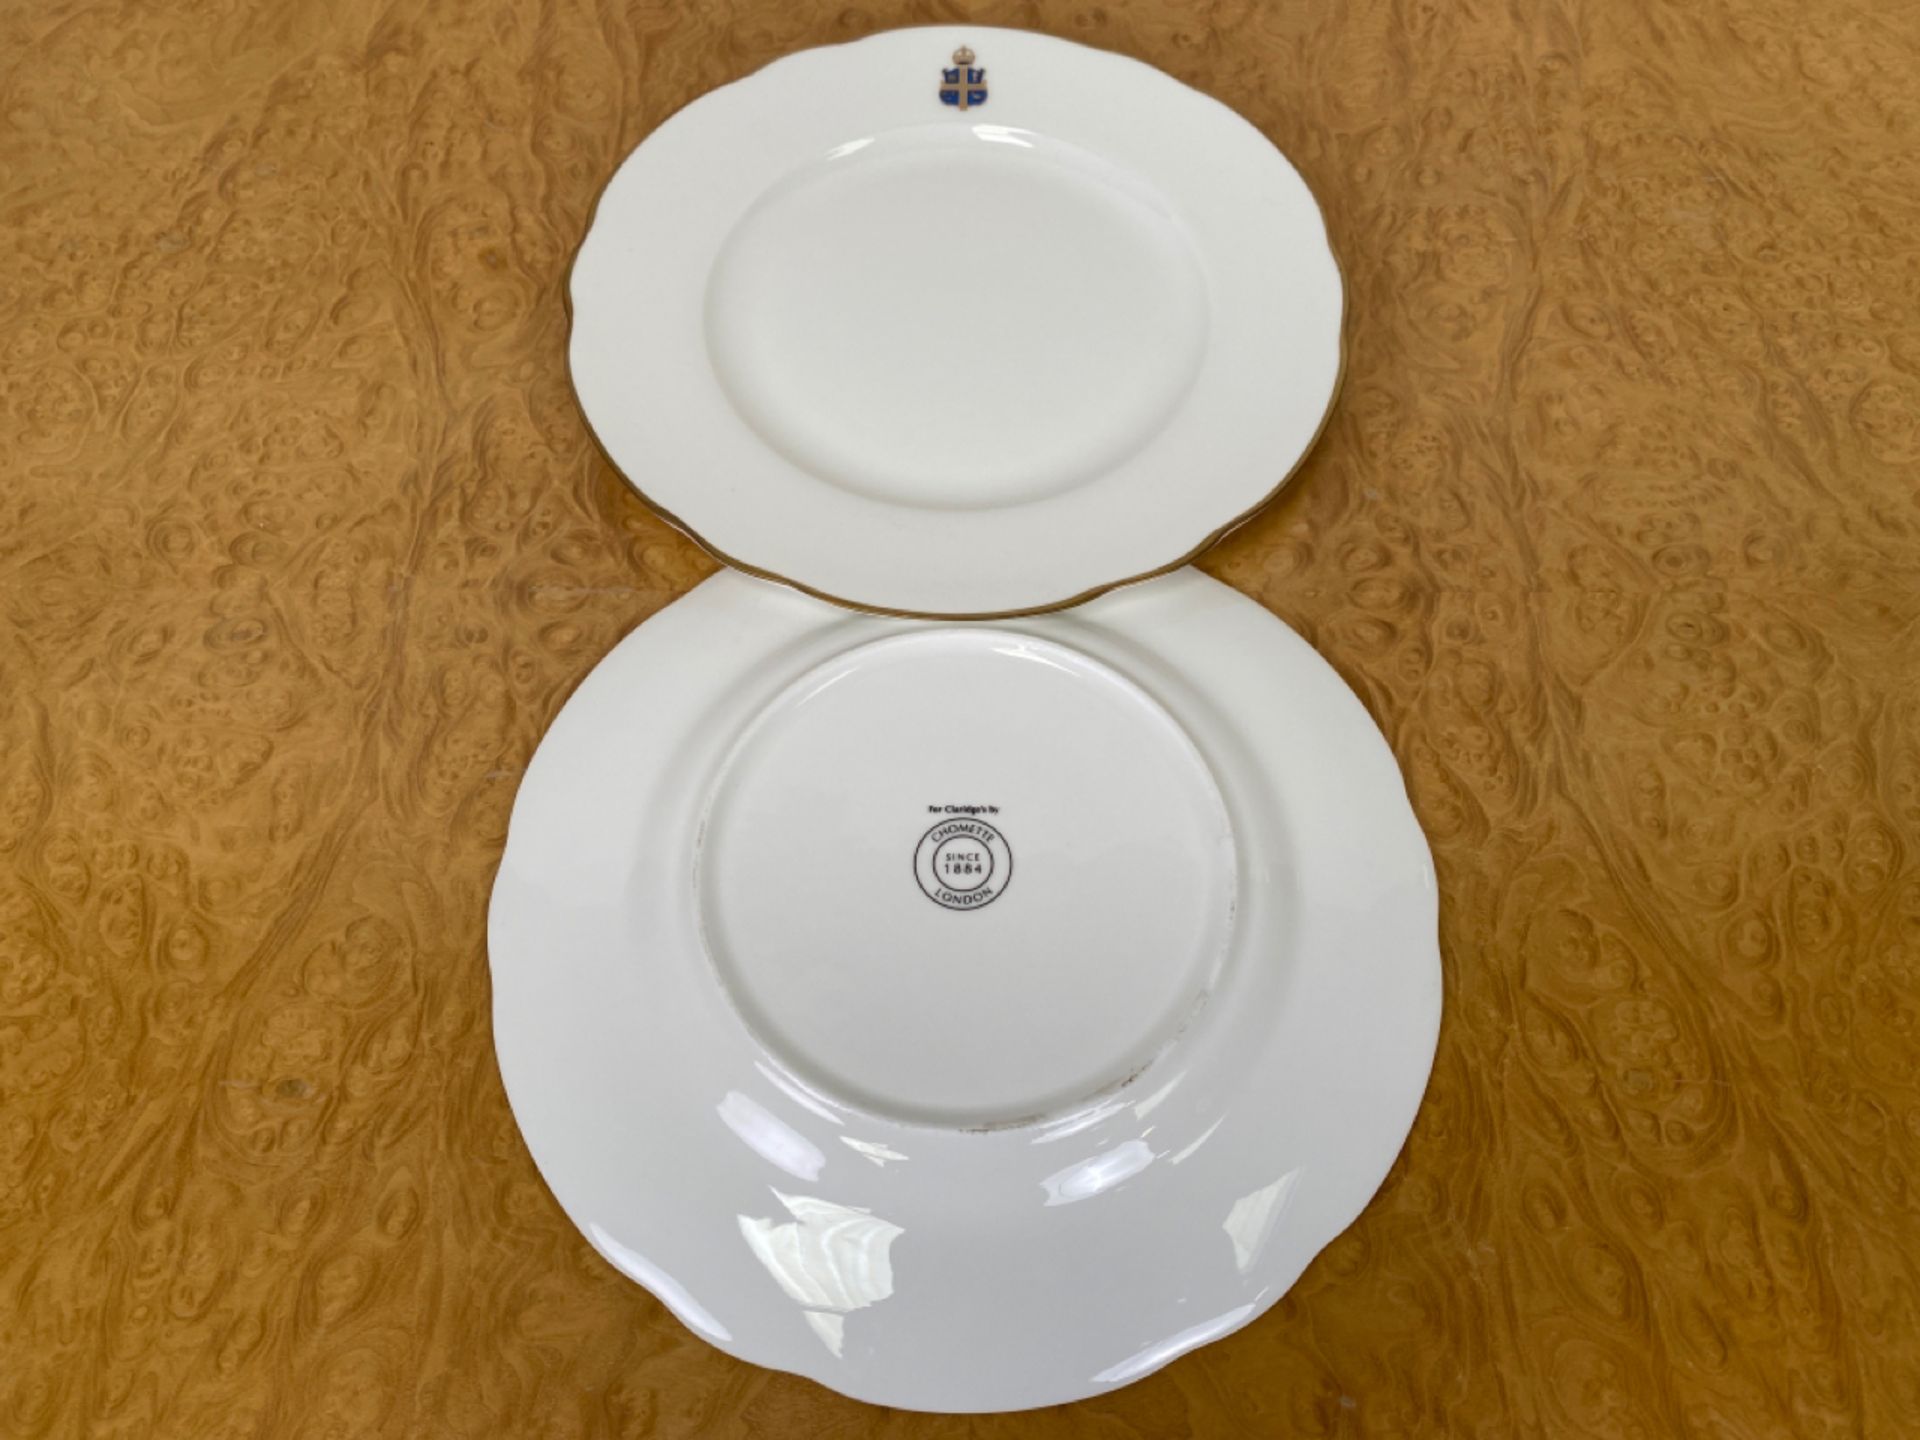 Set of Crested Crockery for Claridge's by Chommette 1884 - Image 26 of 44